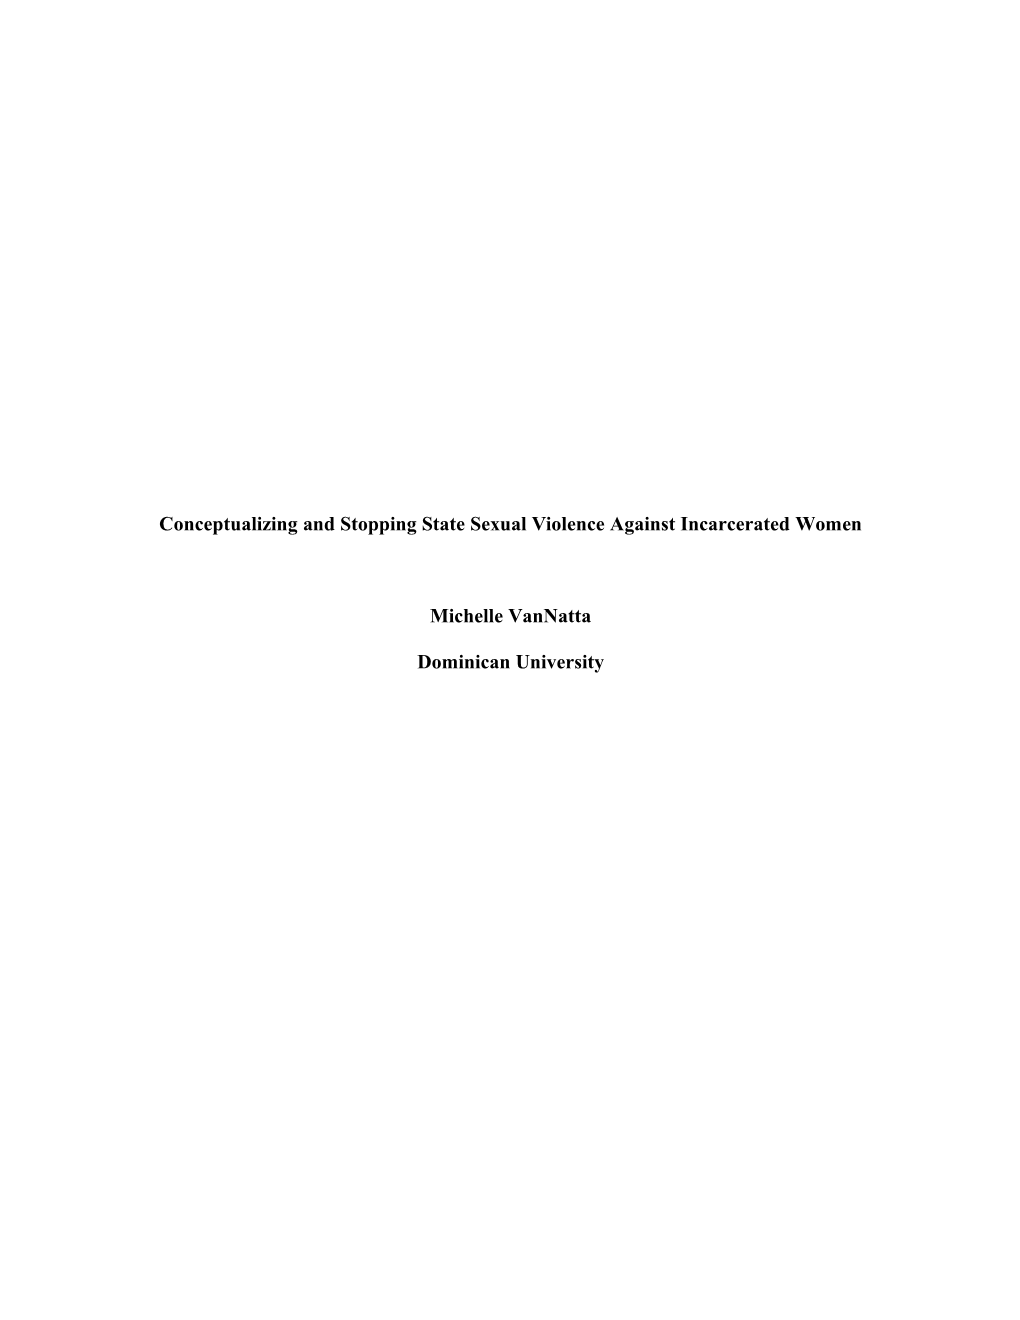 Conceptualizing and Stopping State Sexual Violence Against Incarcerated Women